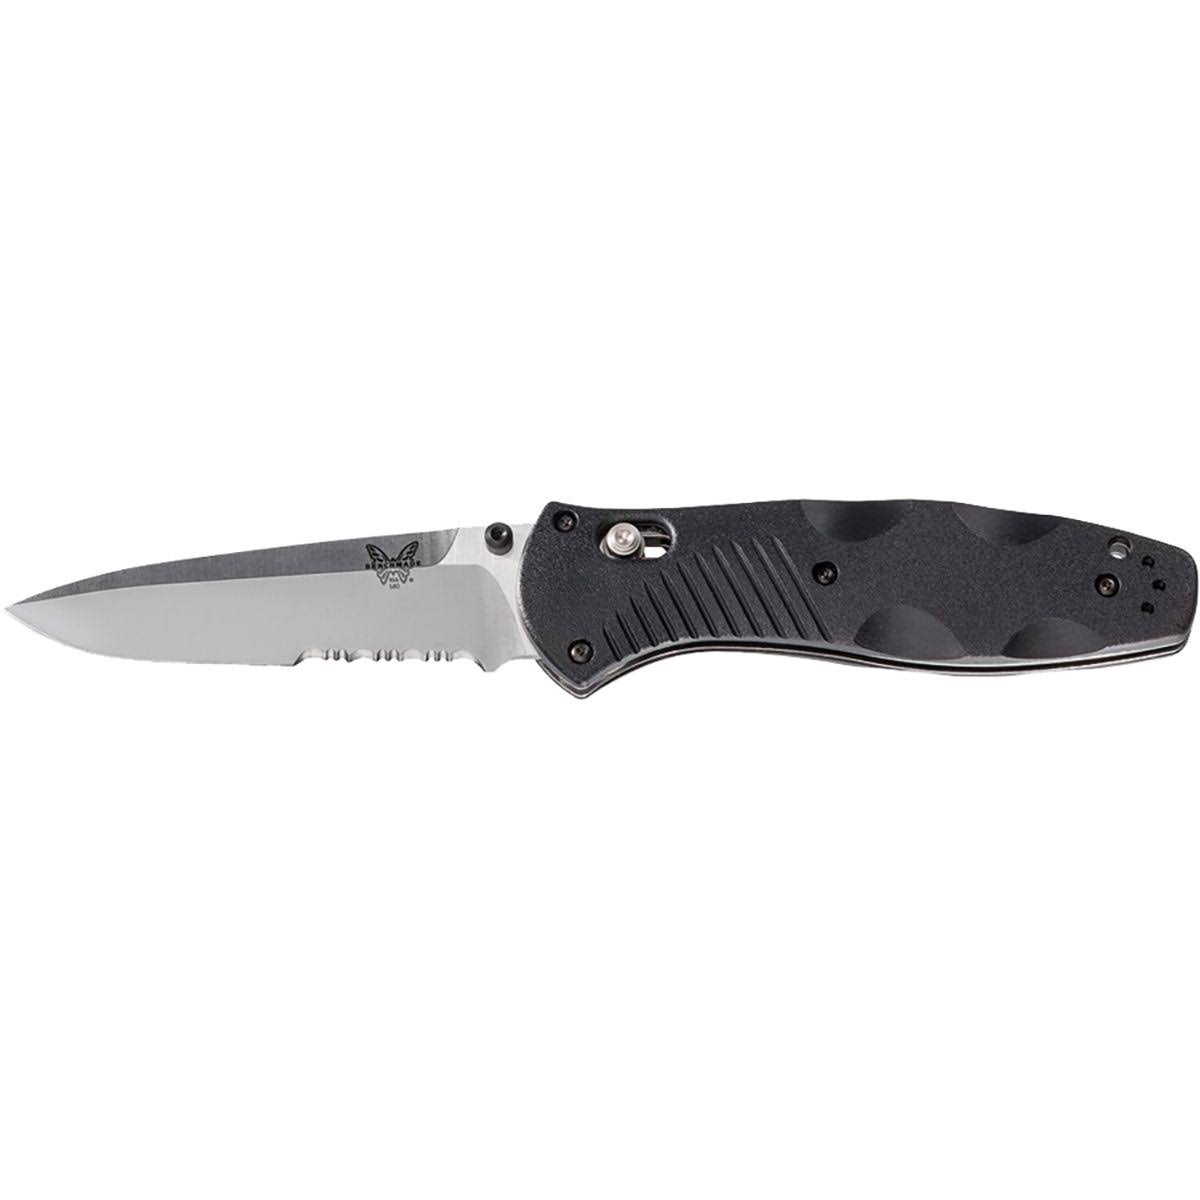 Benchmade Osborne Design ComboEdge Barrage Drop-Point Blade - with AXIS Assist